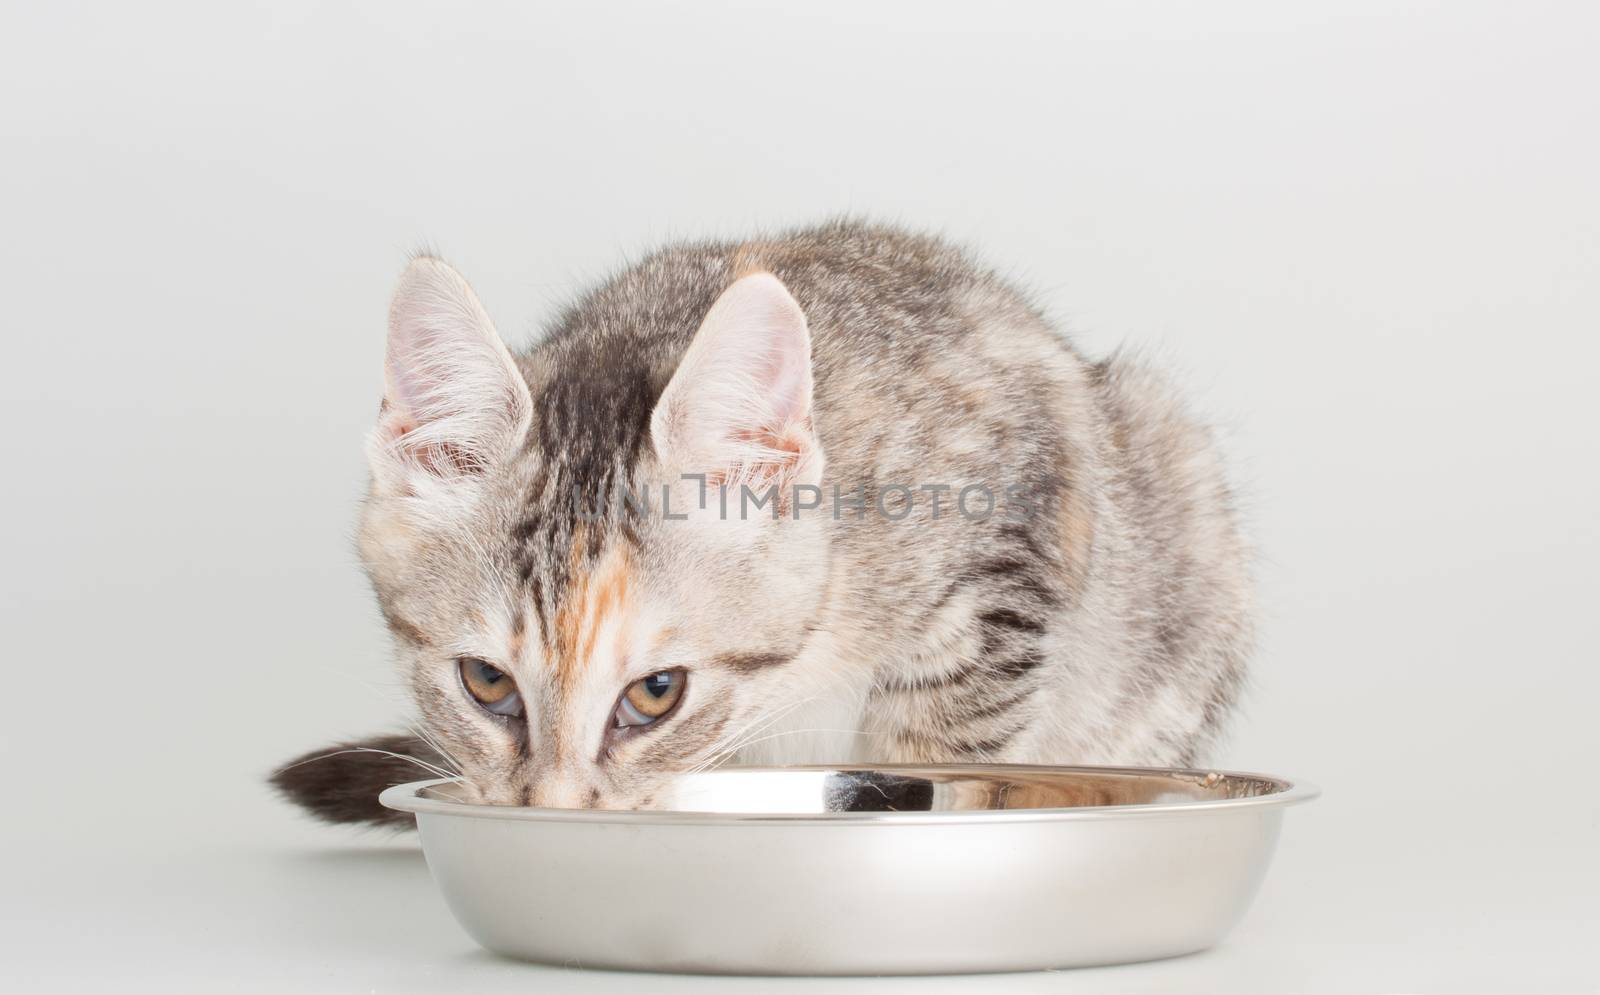 Cute kittent eating his meal in a stainless steal bowl